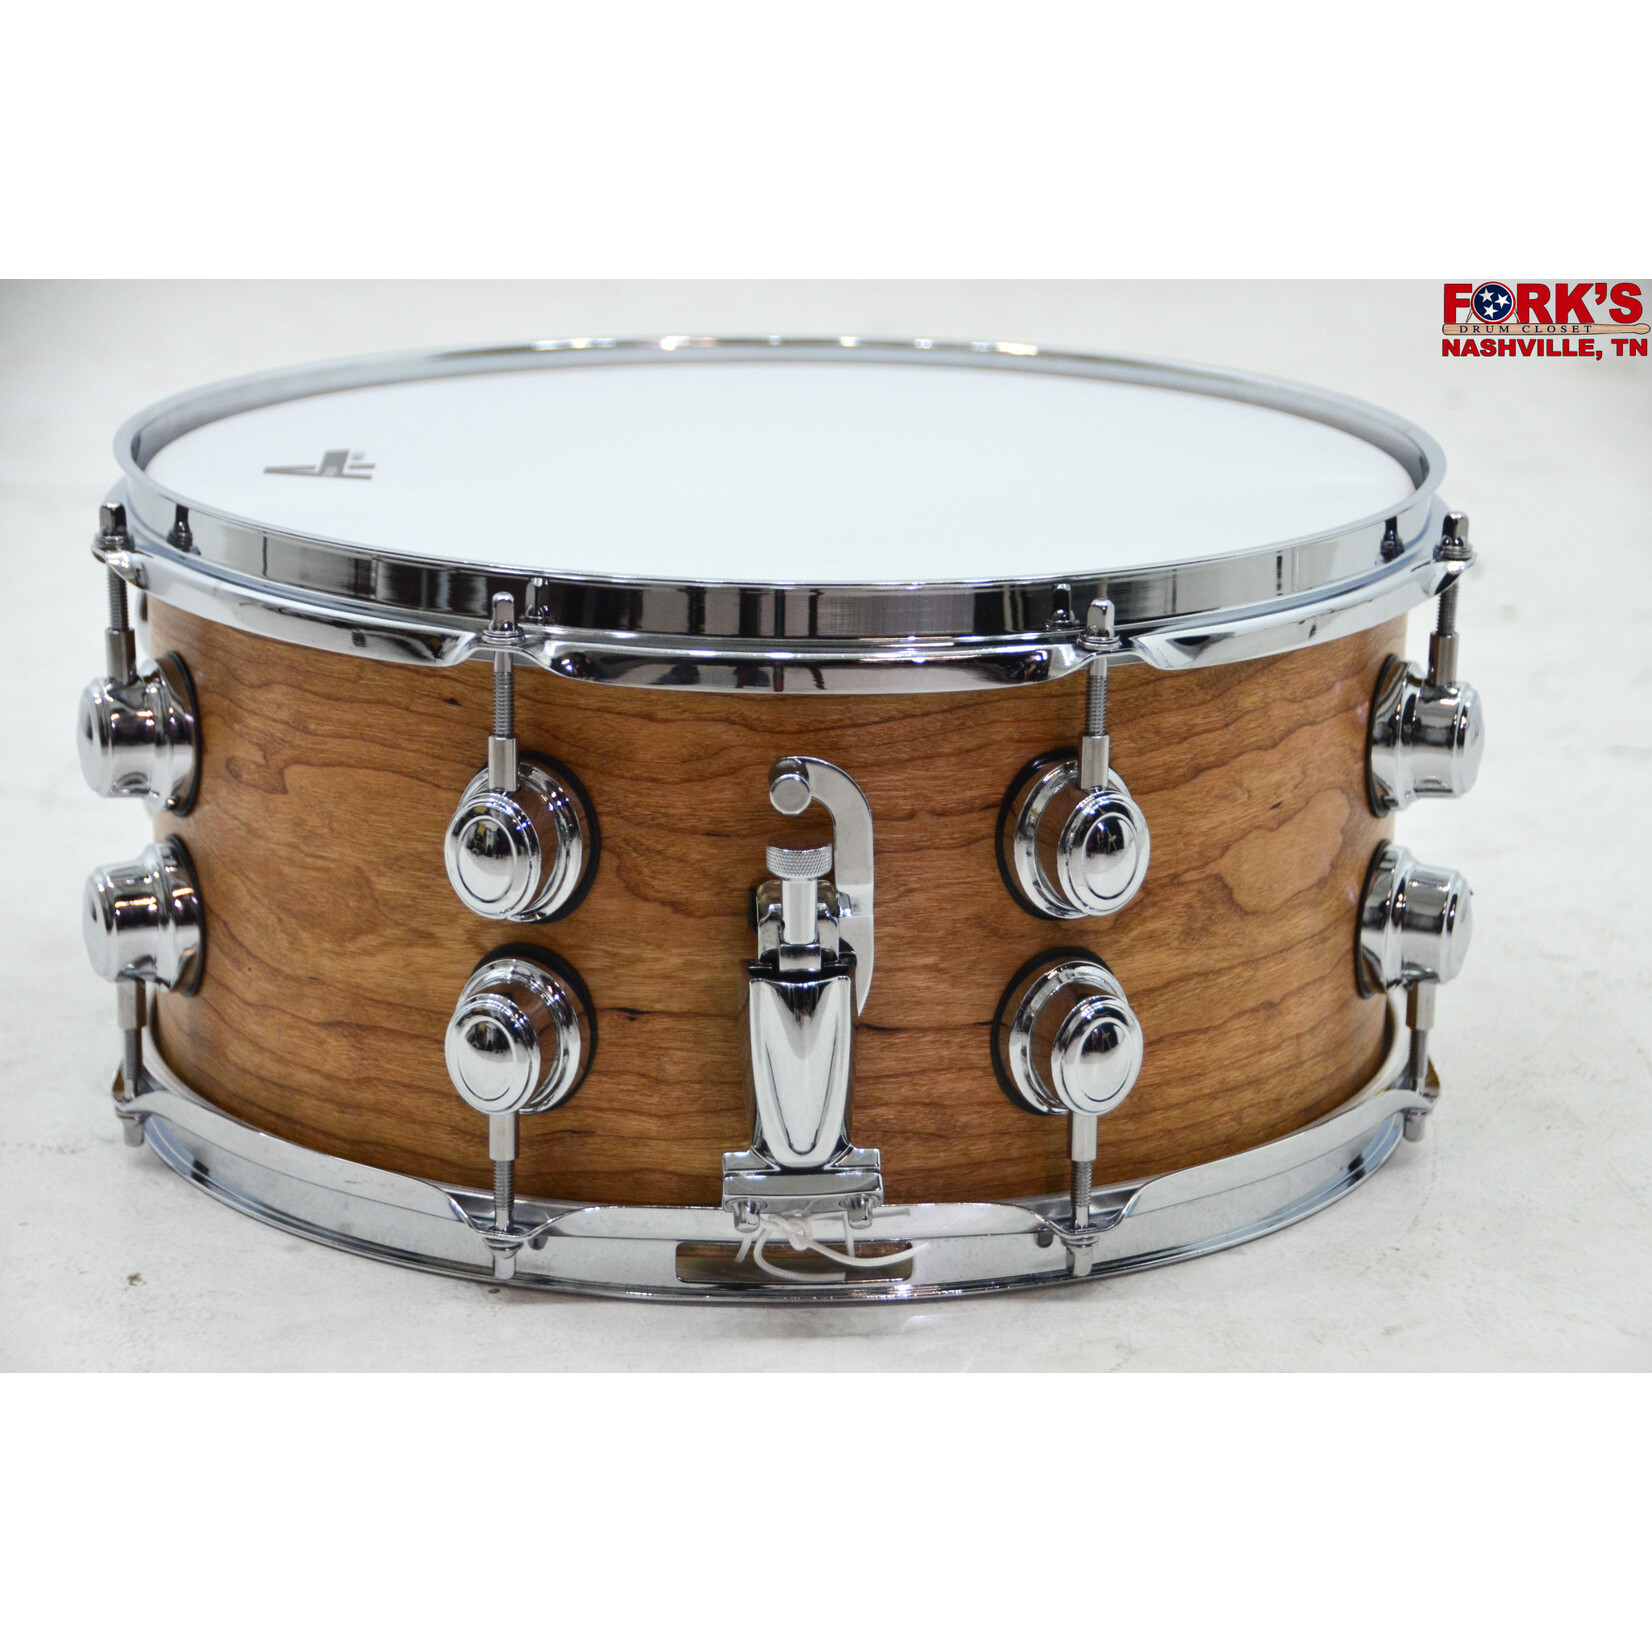 Erie ERIE Drums & Shells 7x14 Cherry Snare Drum